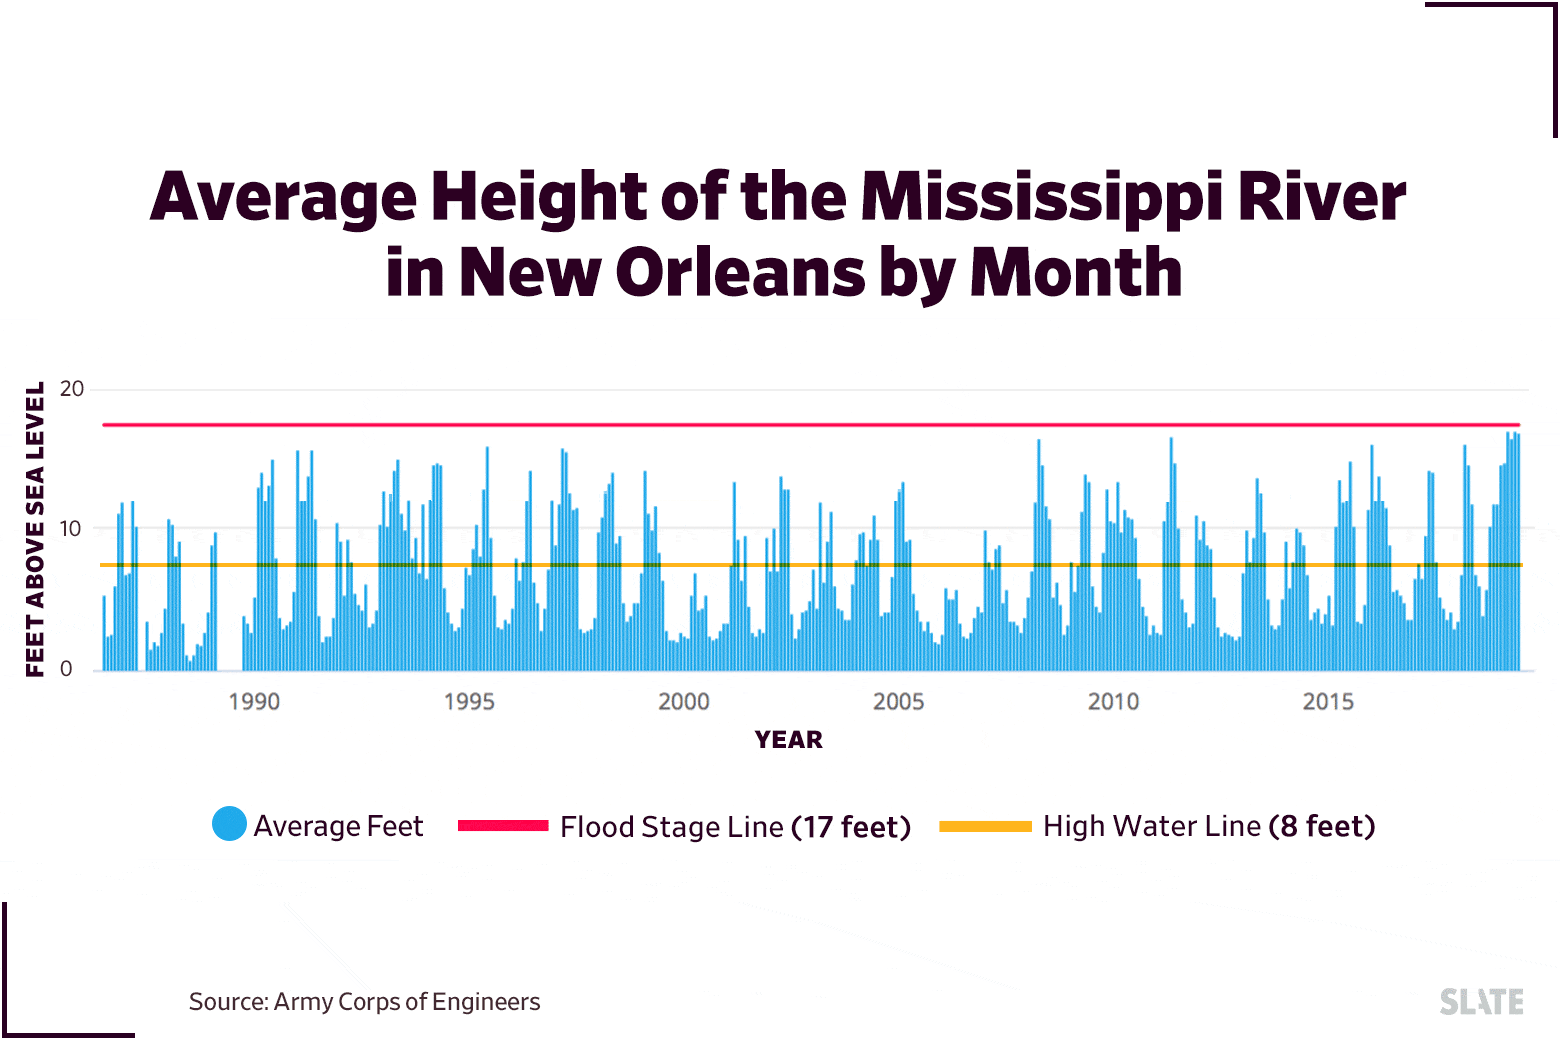 Average height of the Mississippi by month from 1985 to today.